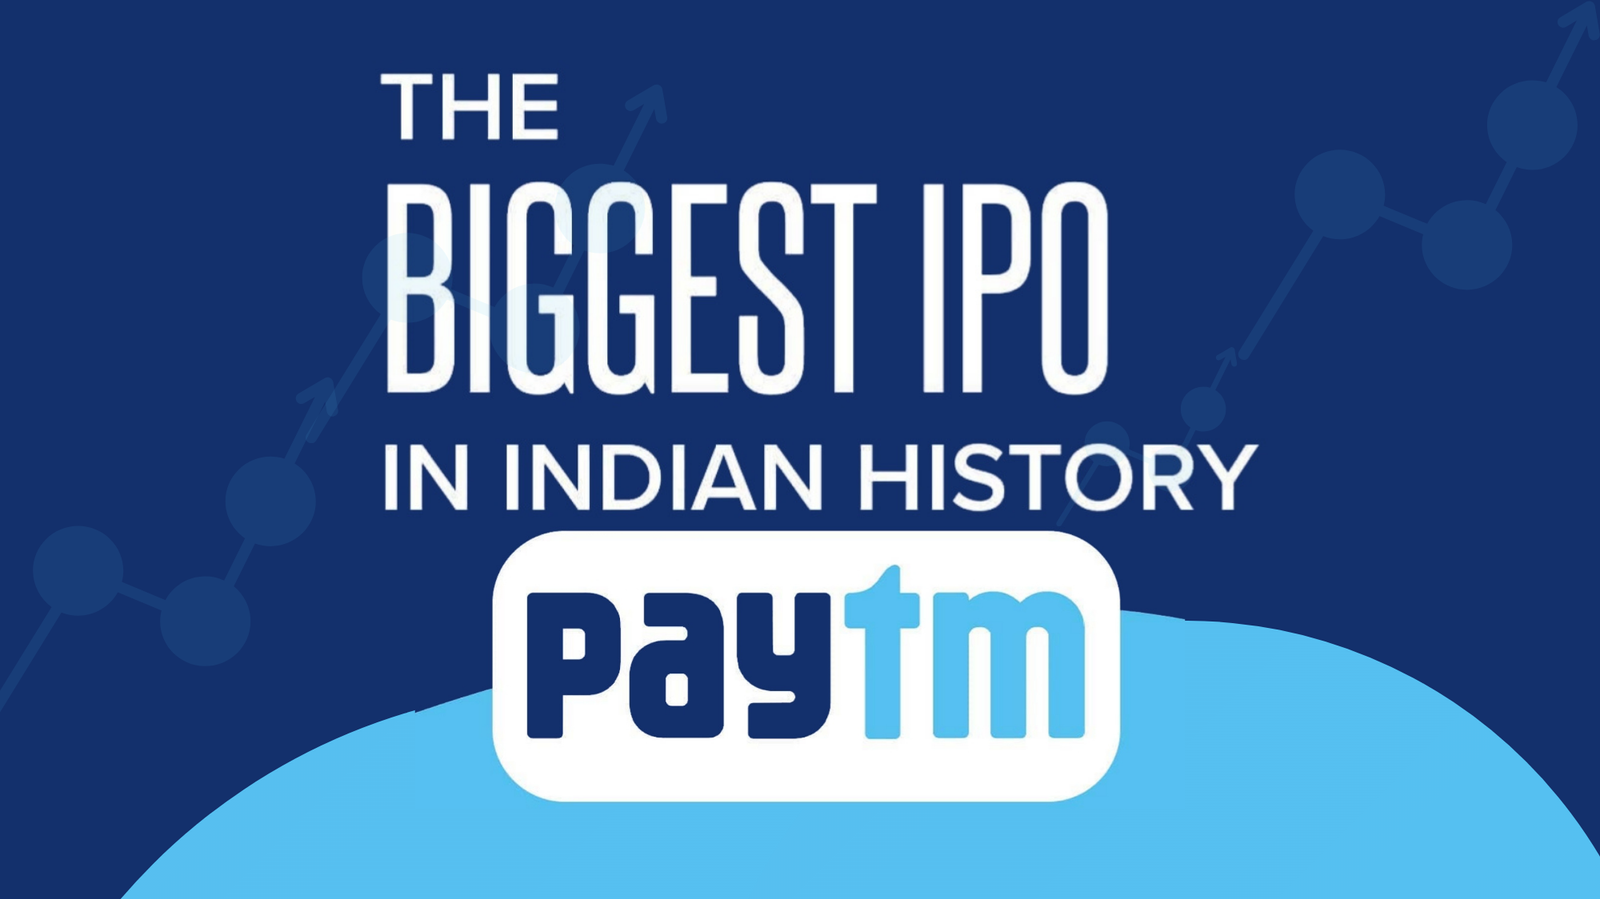 The biggest indian ipo of paytm